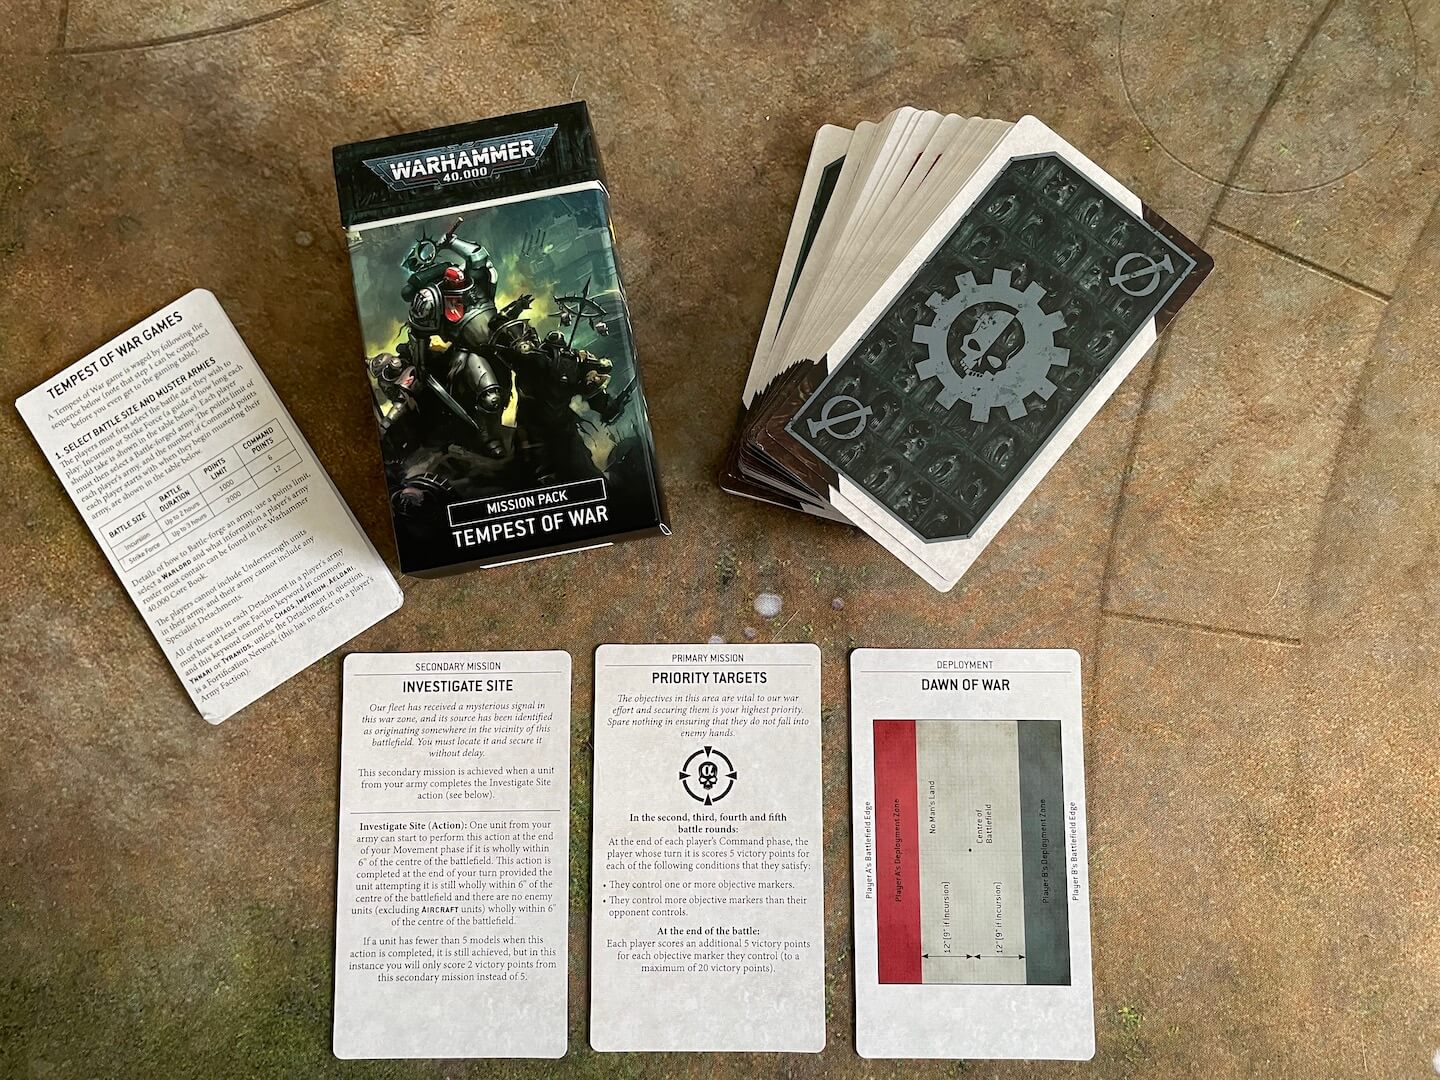 The Warhammer 40K Mission Pack makes bringing battles to the tabletop easier than ever